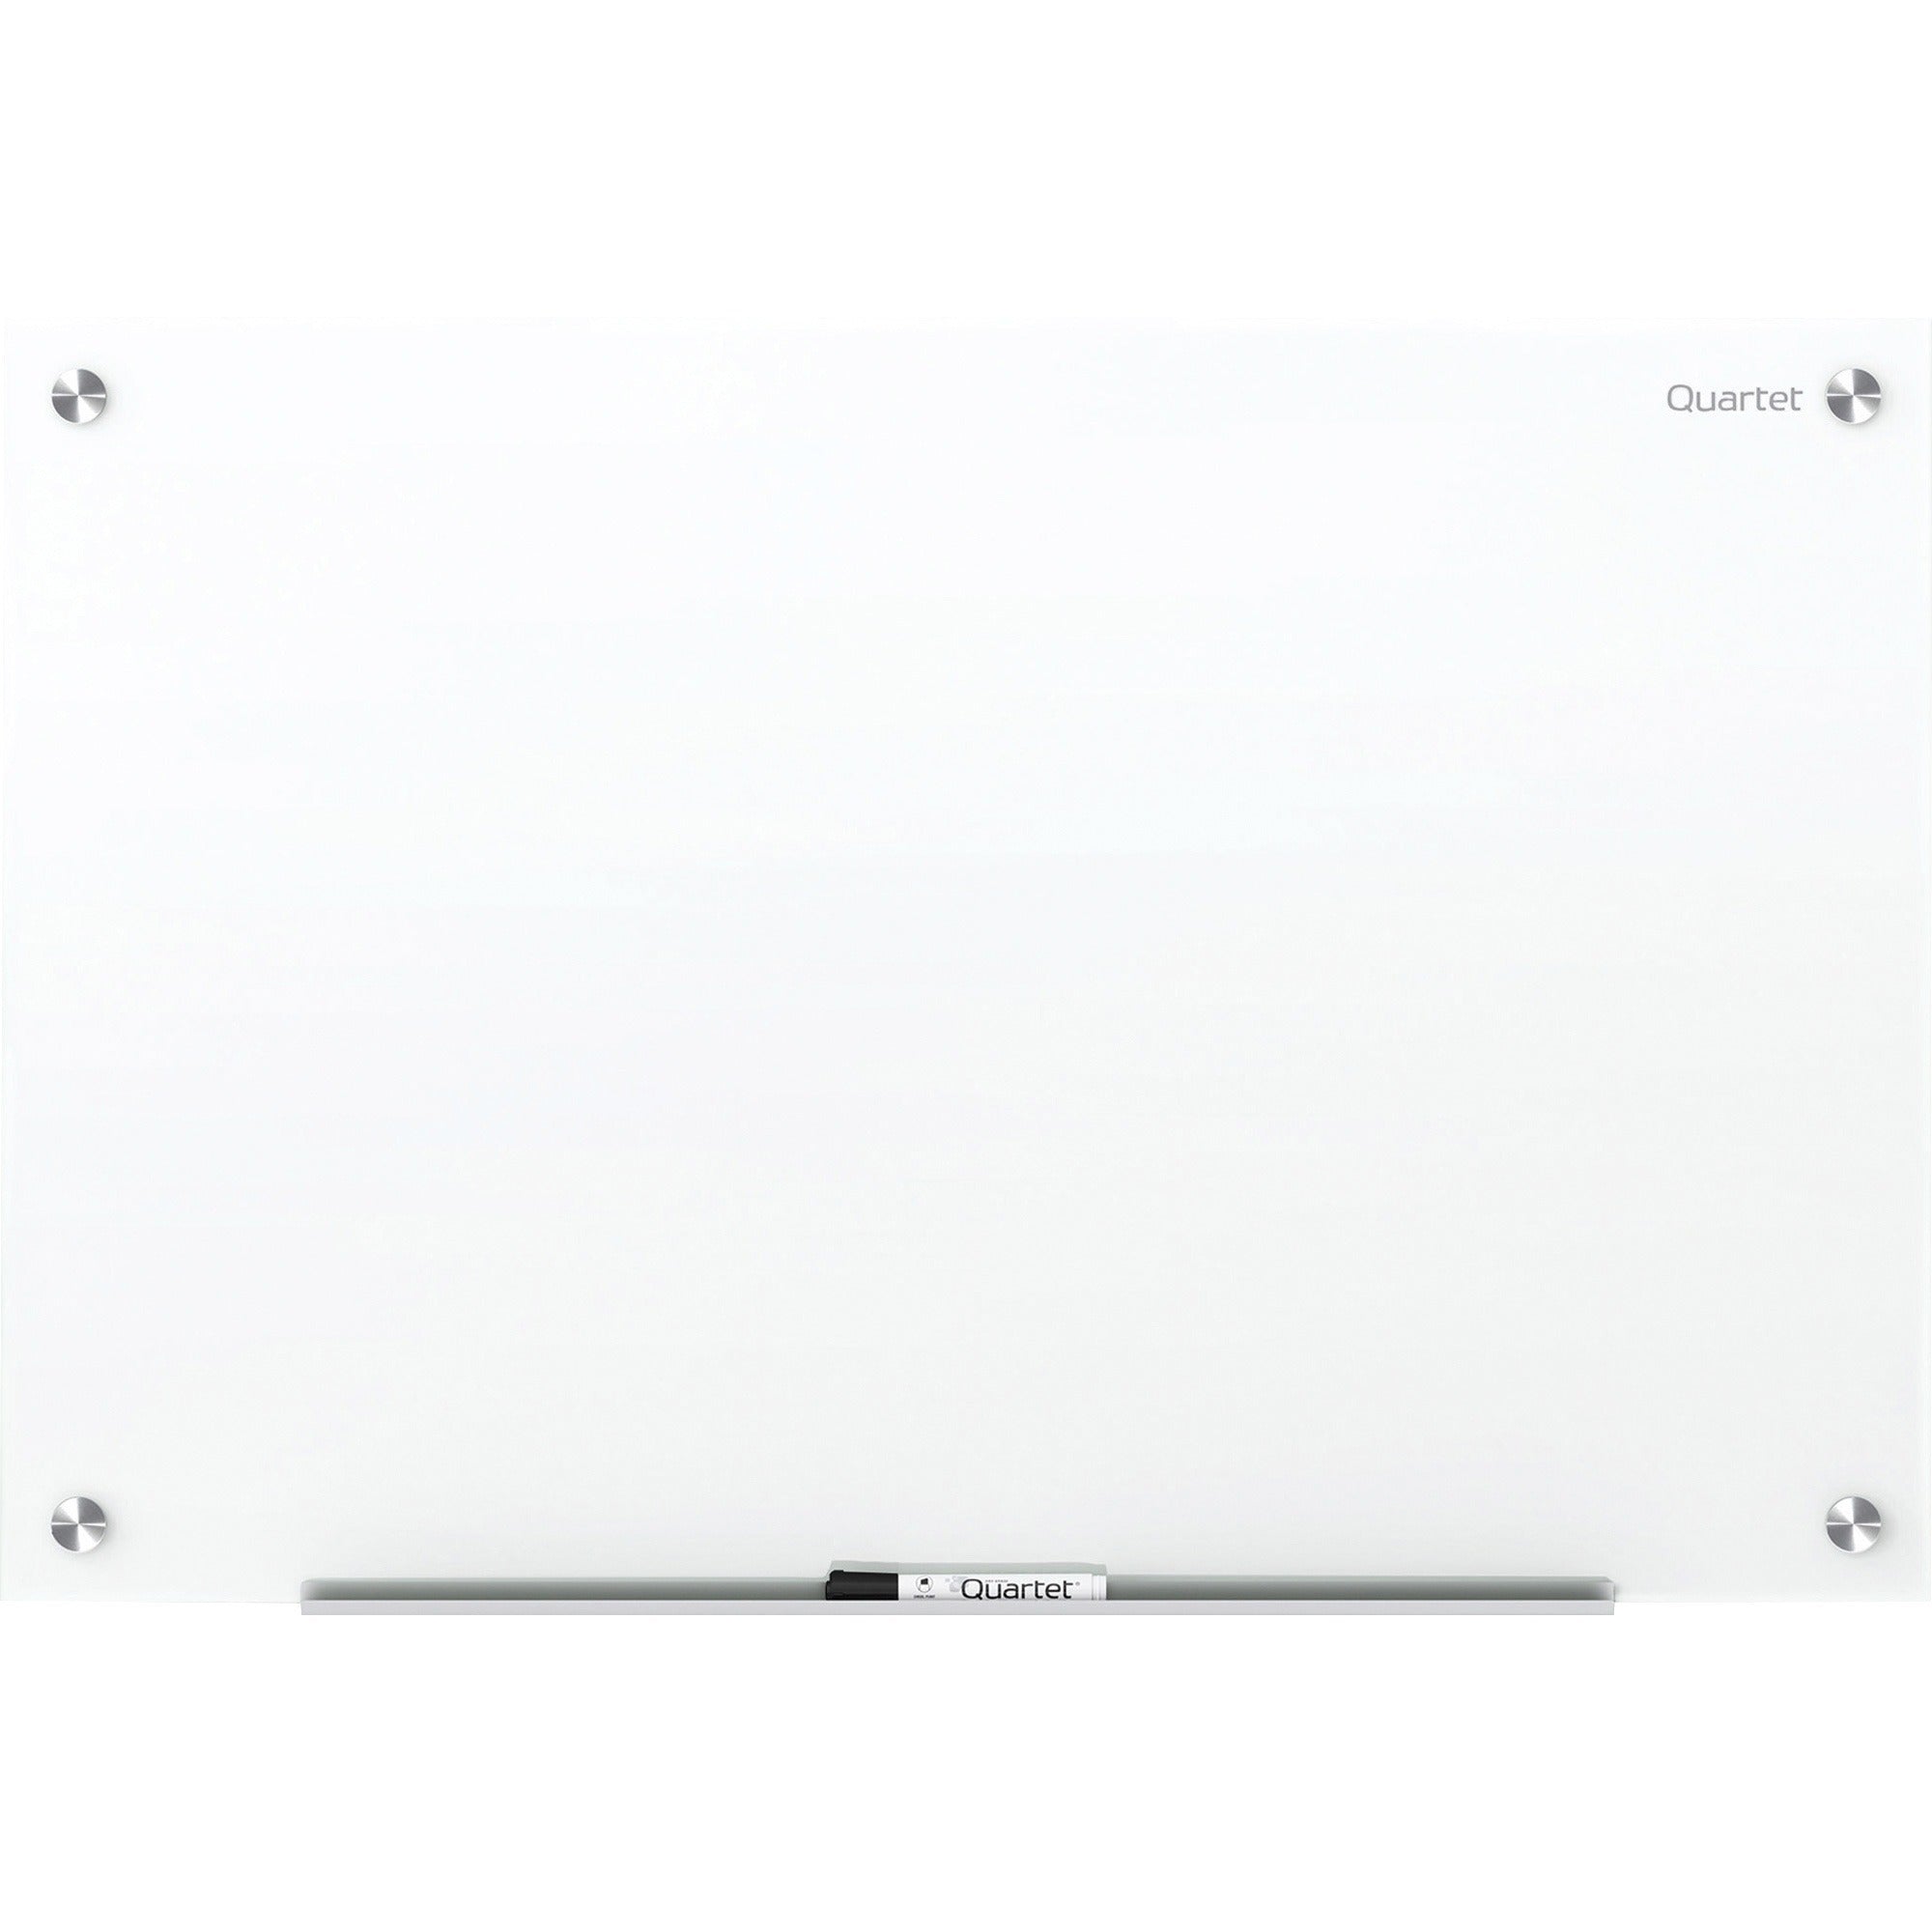 quartet-magnetic-glass-dry-erase-board-36-3-ft-width-x-24-2-ft-height-brilliance-white-tempered-glass-surface-rectangle-horizontal-vertical-magnetic-1-each_qrtg23624w - 1